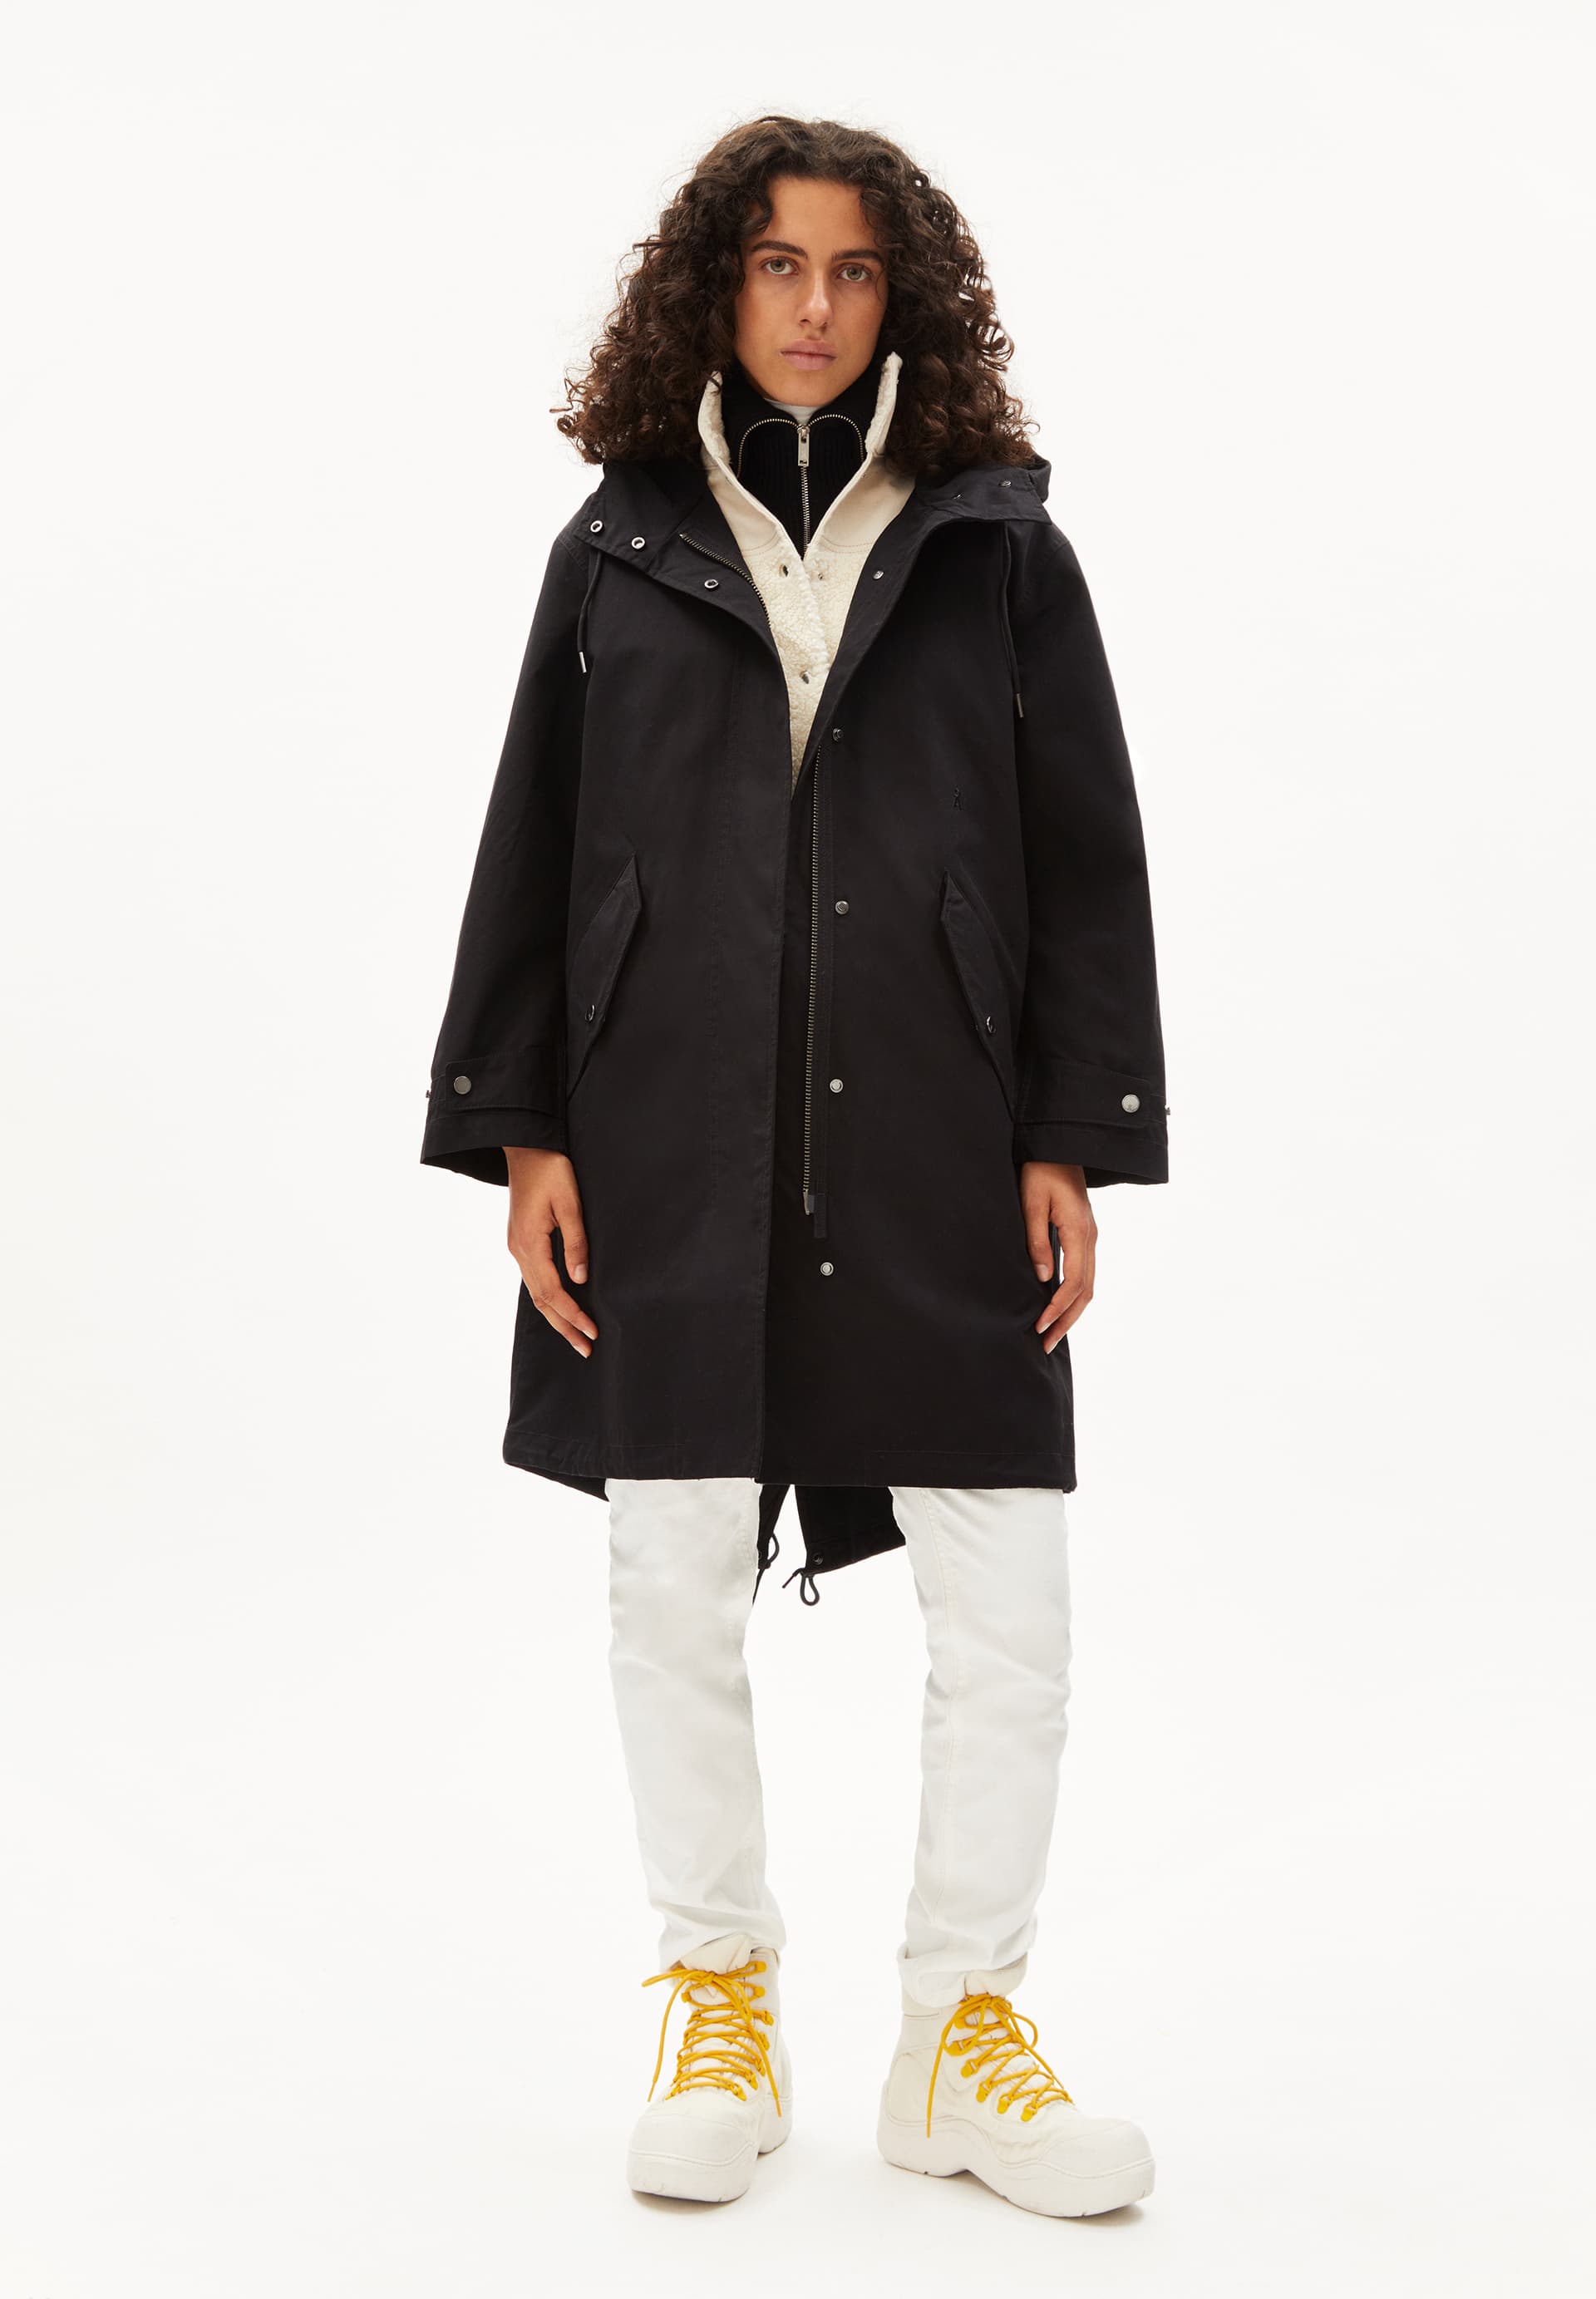 PENEDAA CORE Parka Relaxed Fit made of Organic Cotton